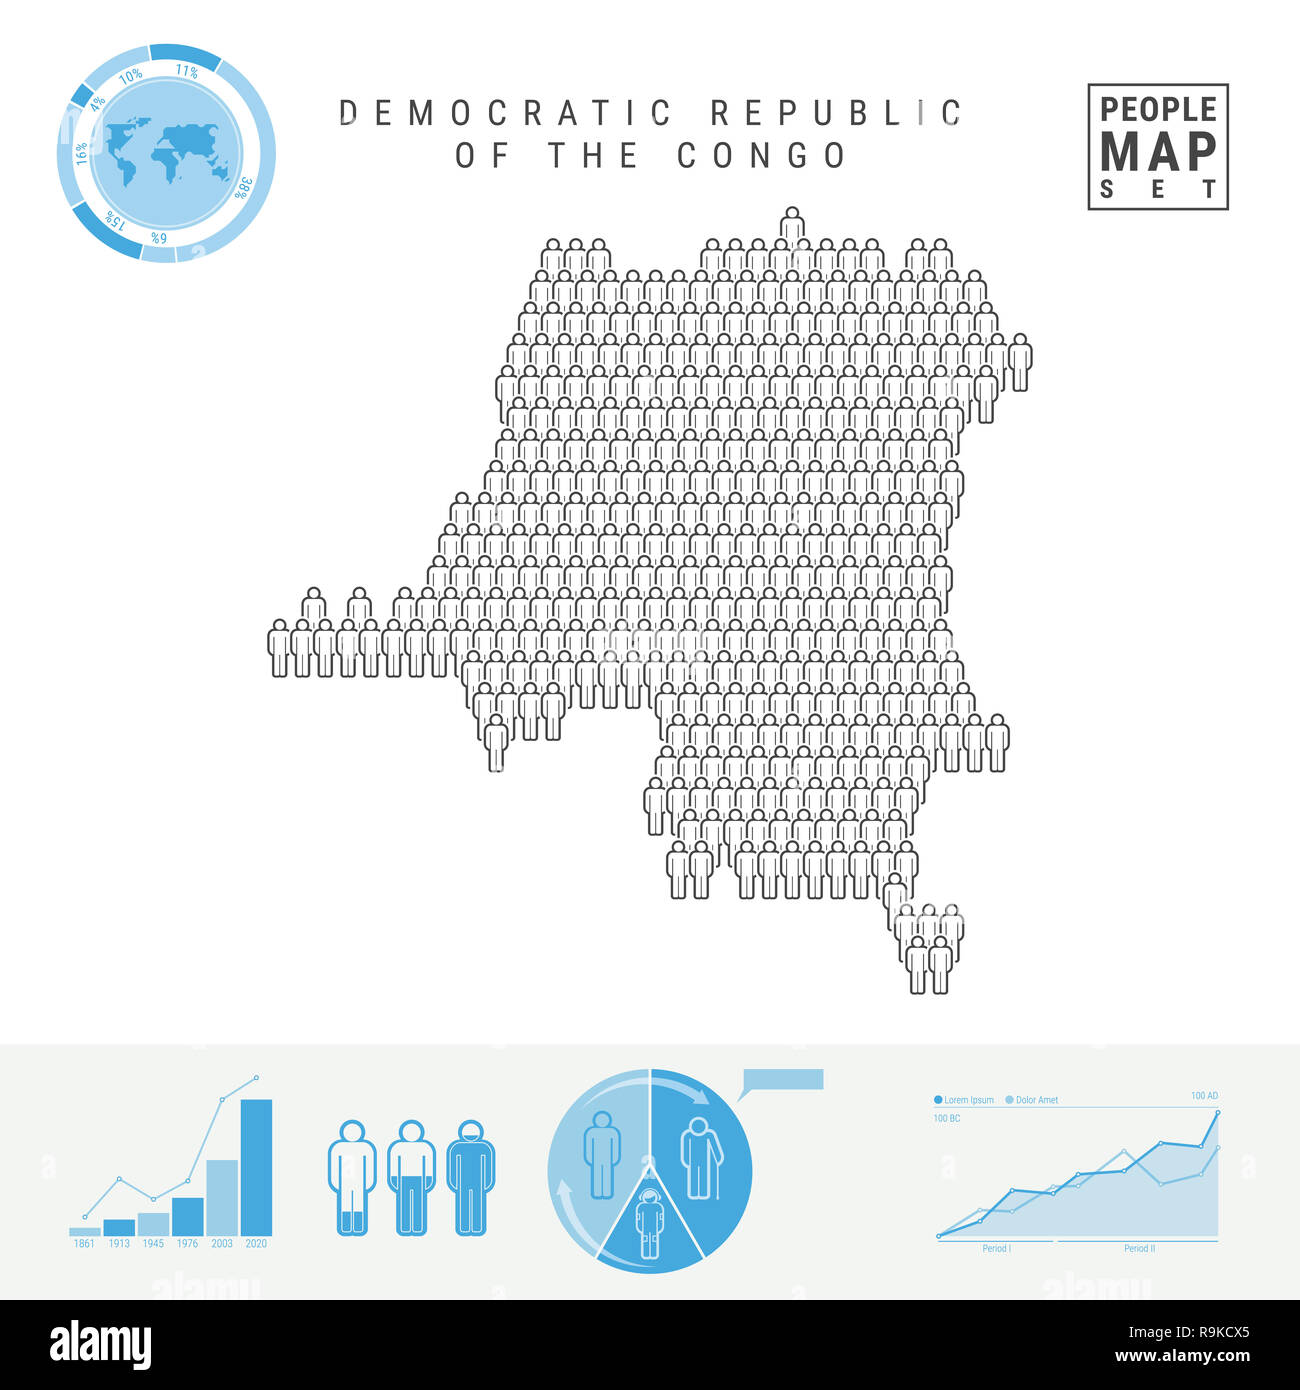 Democratic Republic of the Congo People Icon Map. People Crowd in the Shape of a Map of DR Congo. Stylized Silhouette. Population Growth and Aging Inf Stock Photo